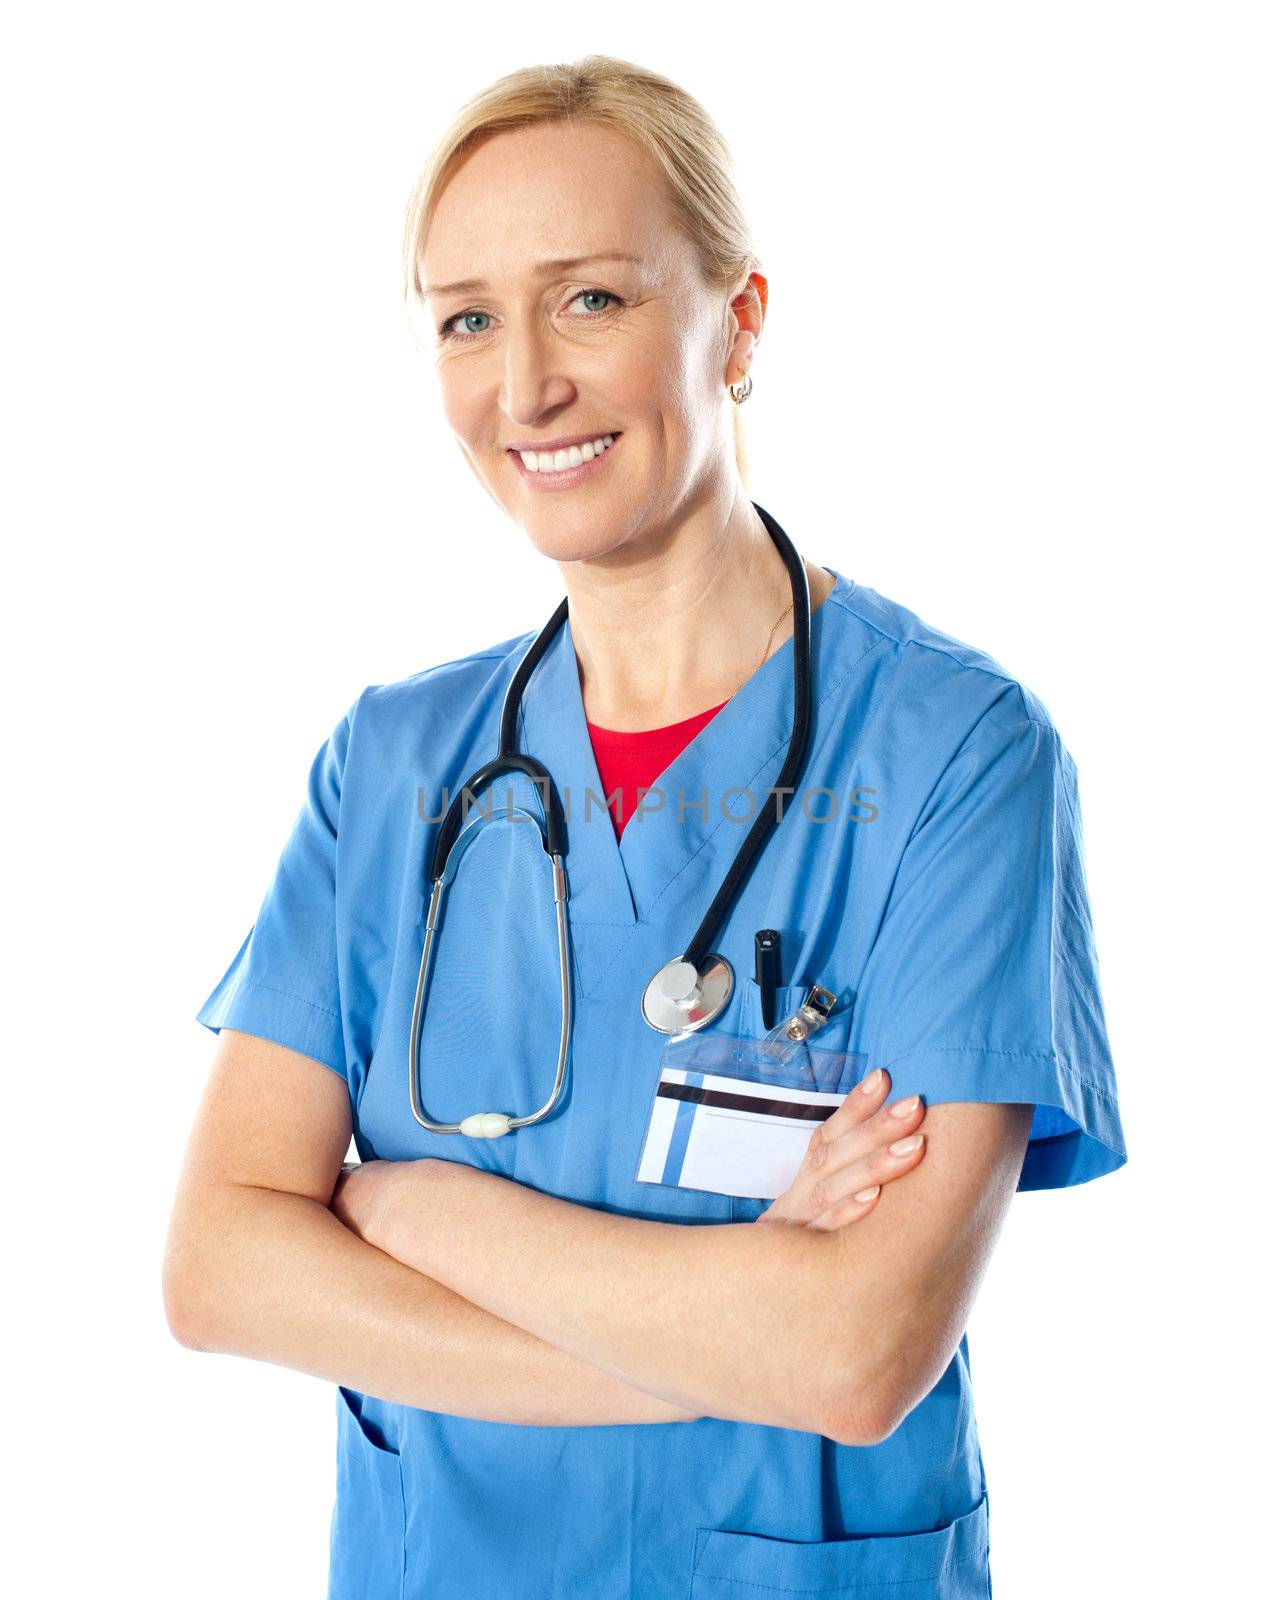 Experienced medical professional posing with folded arms isolated on white